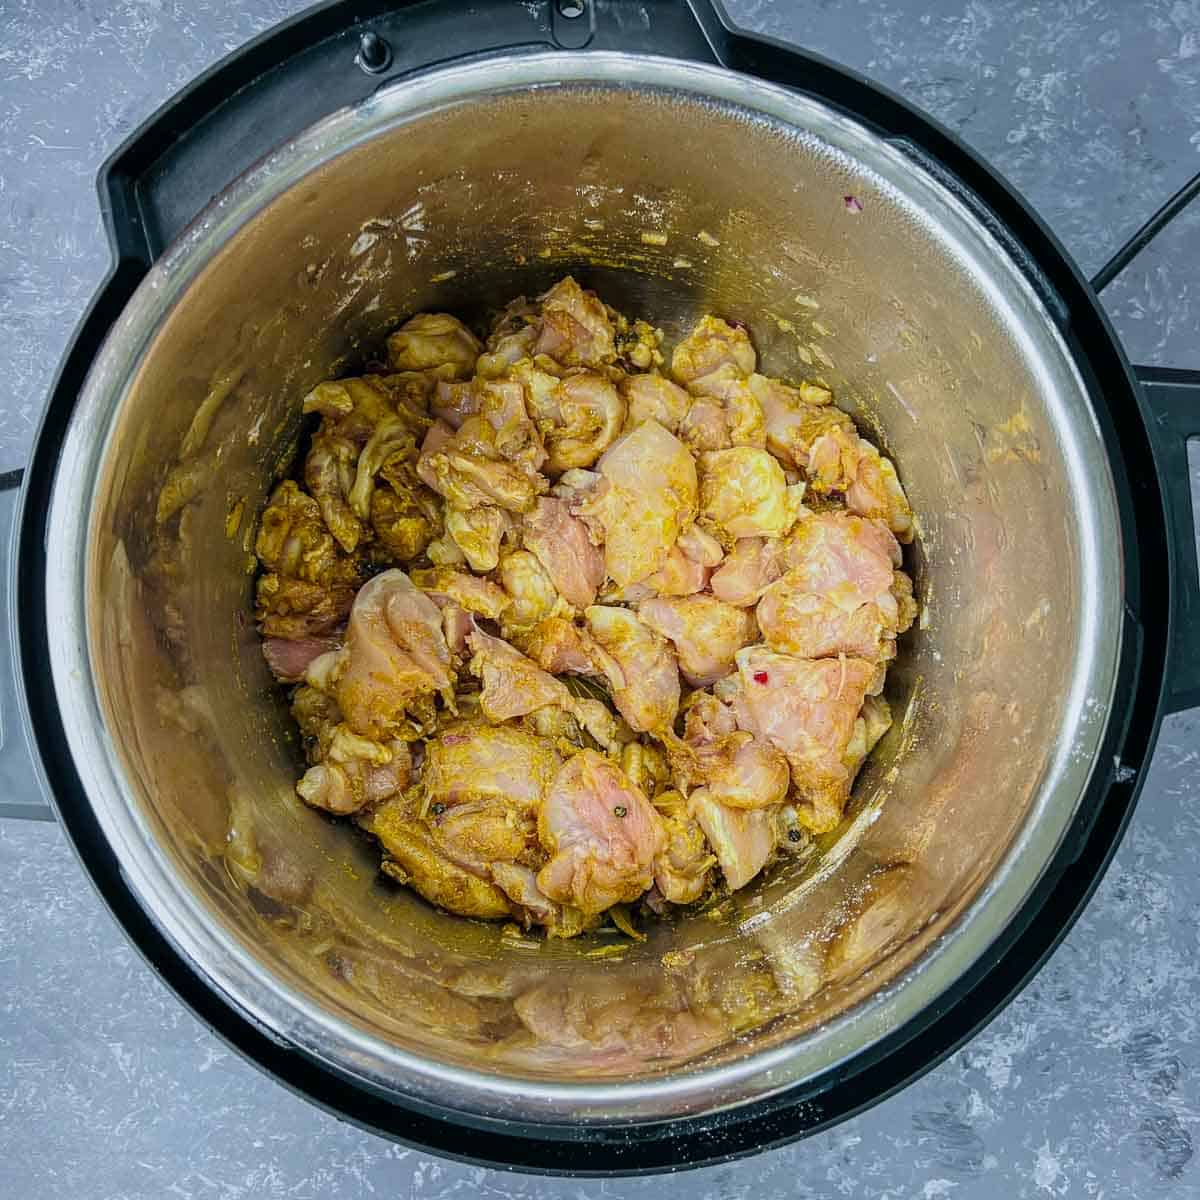 Sauted chicken and ground spices in the Instant Pot.